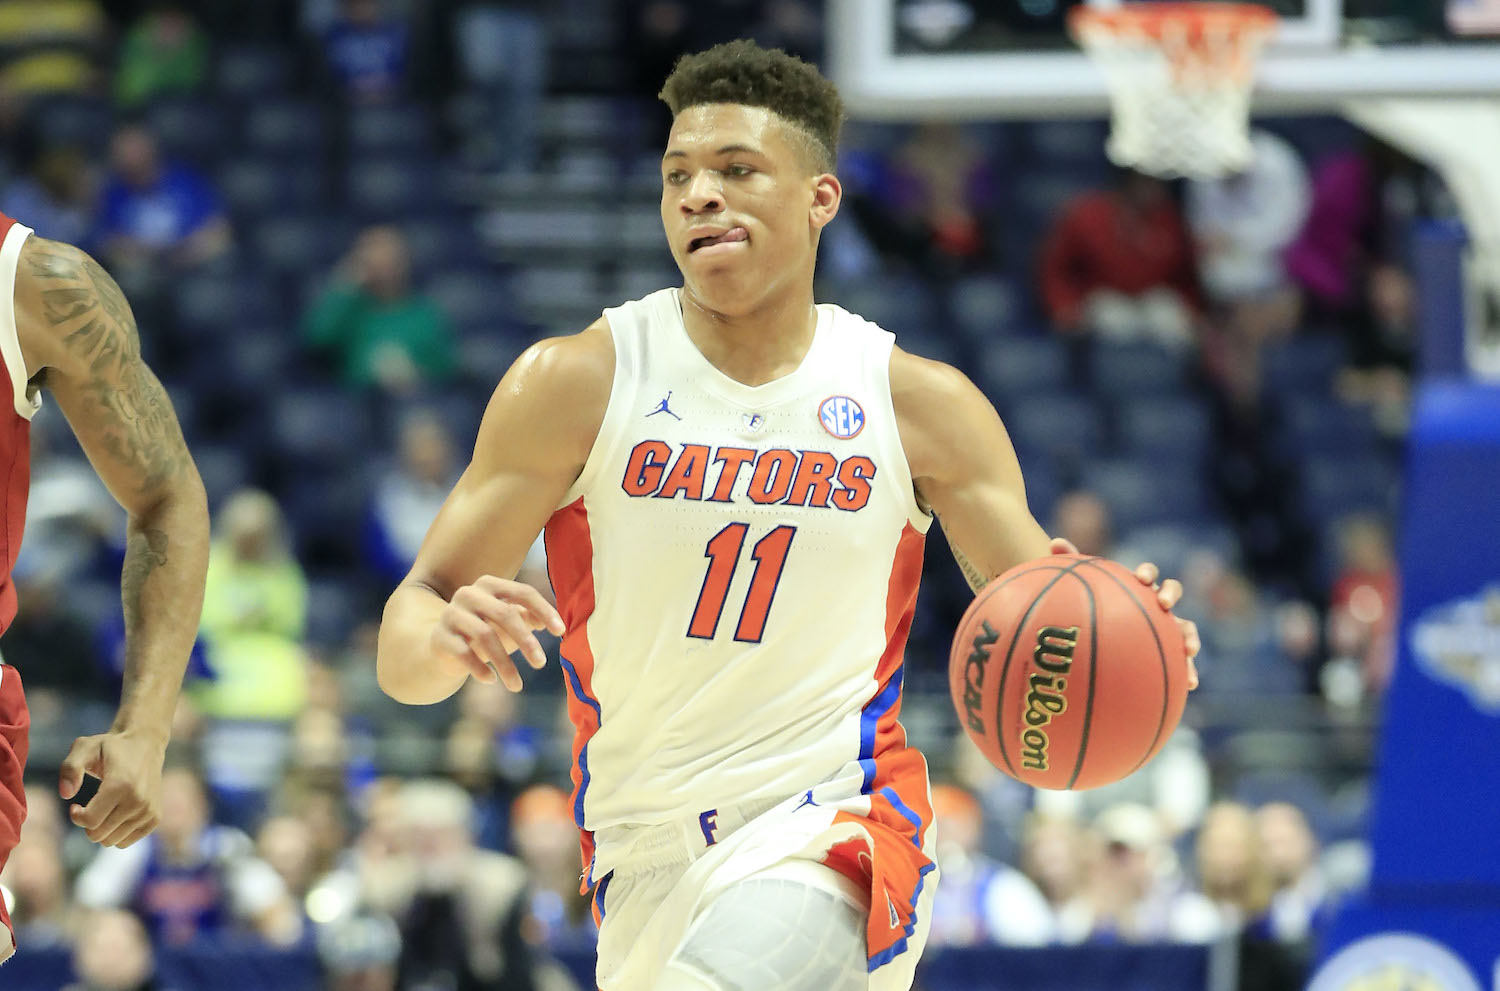 NASHVILLE, TENNESSEE - MARCH 14: Keyontae Johnson #11 of the Florida Gators dribbles the ball against the Arkansas Razorbacks during the second round of the SEC Basketball Tournament at Bridgestone Arena on March 14, 2019 in Nashville, Tennessee. (Photo by Andy Lyons/Getty Images)